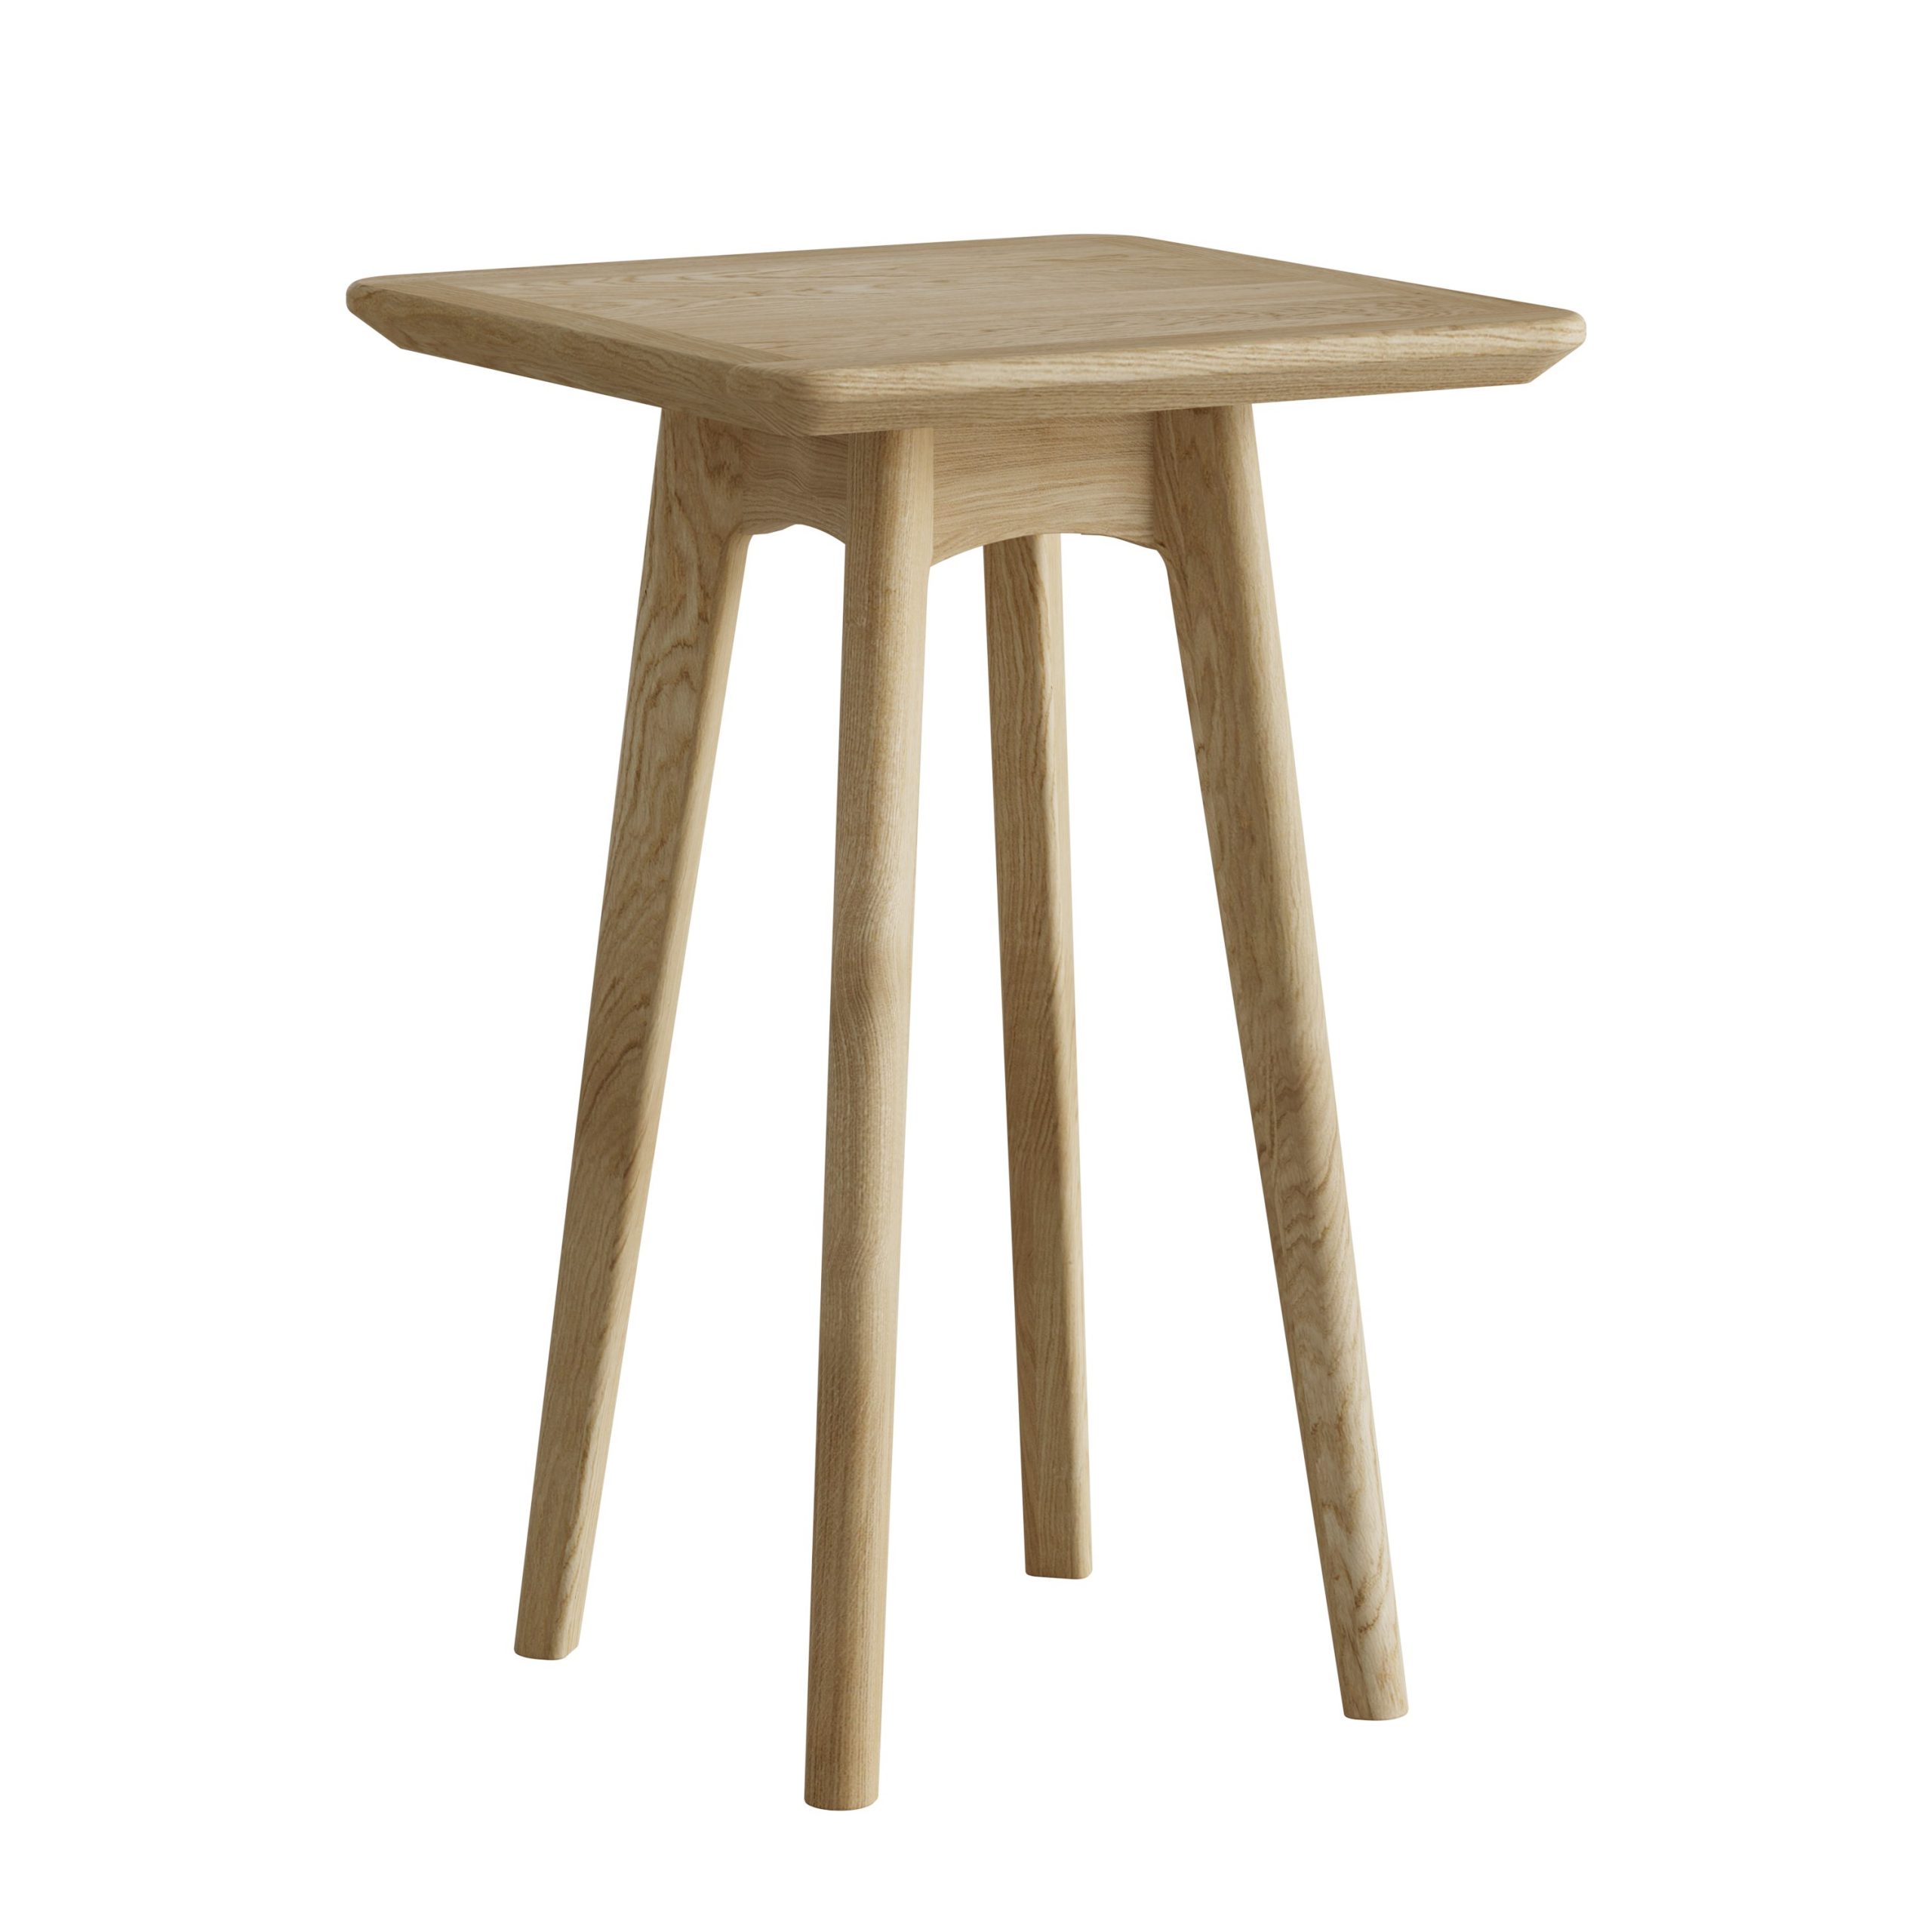 Oak Small Square Wine Table - Our Price - Only £149